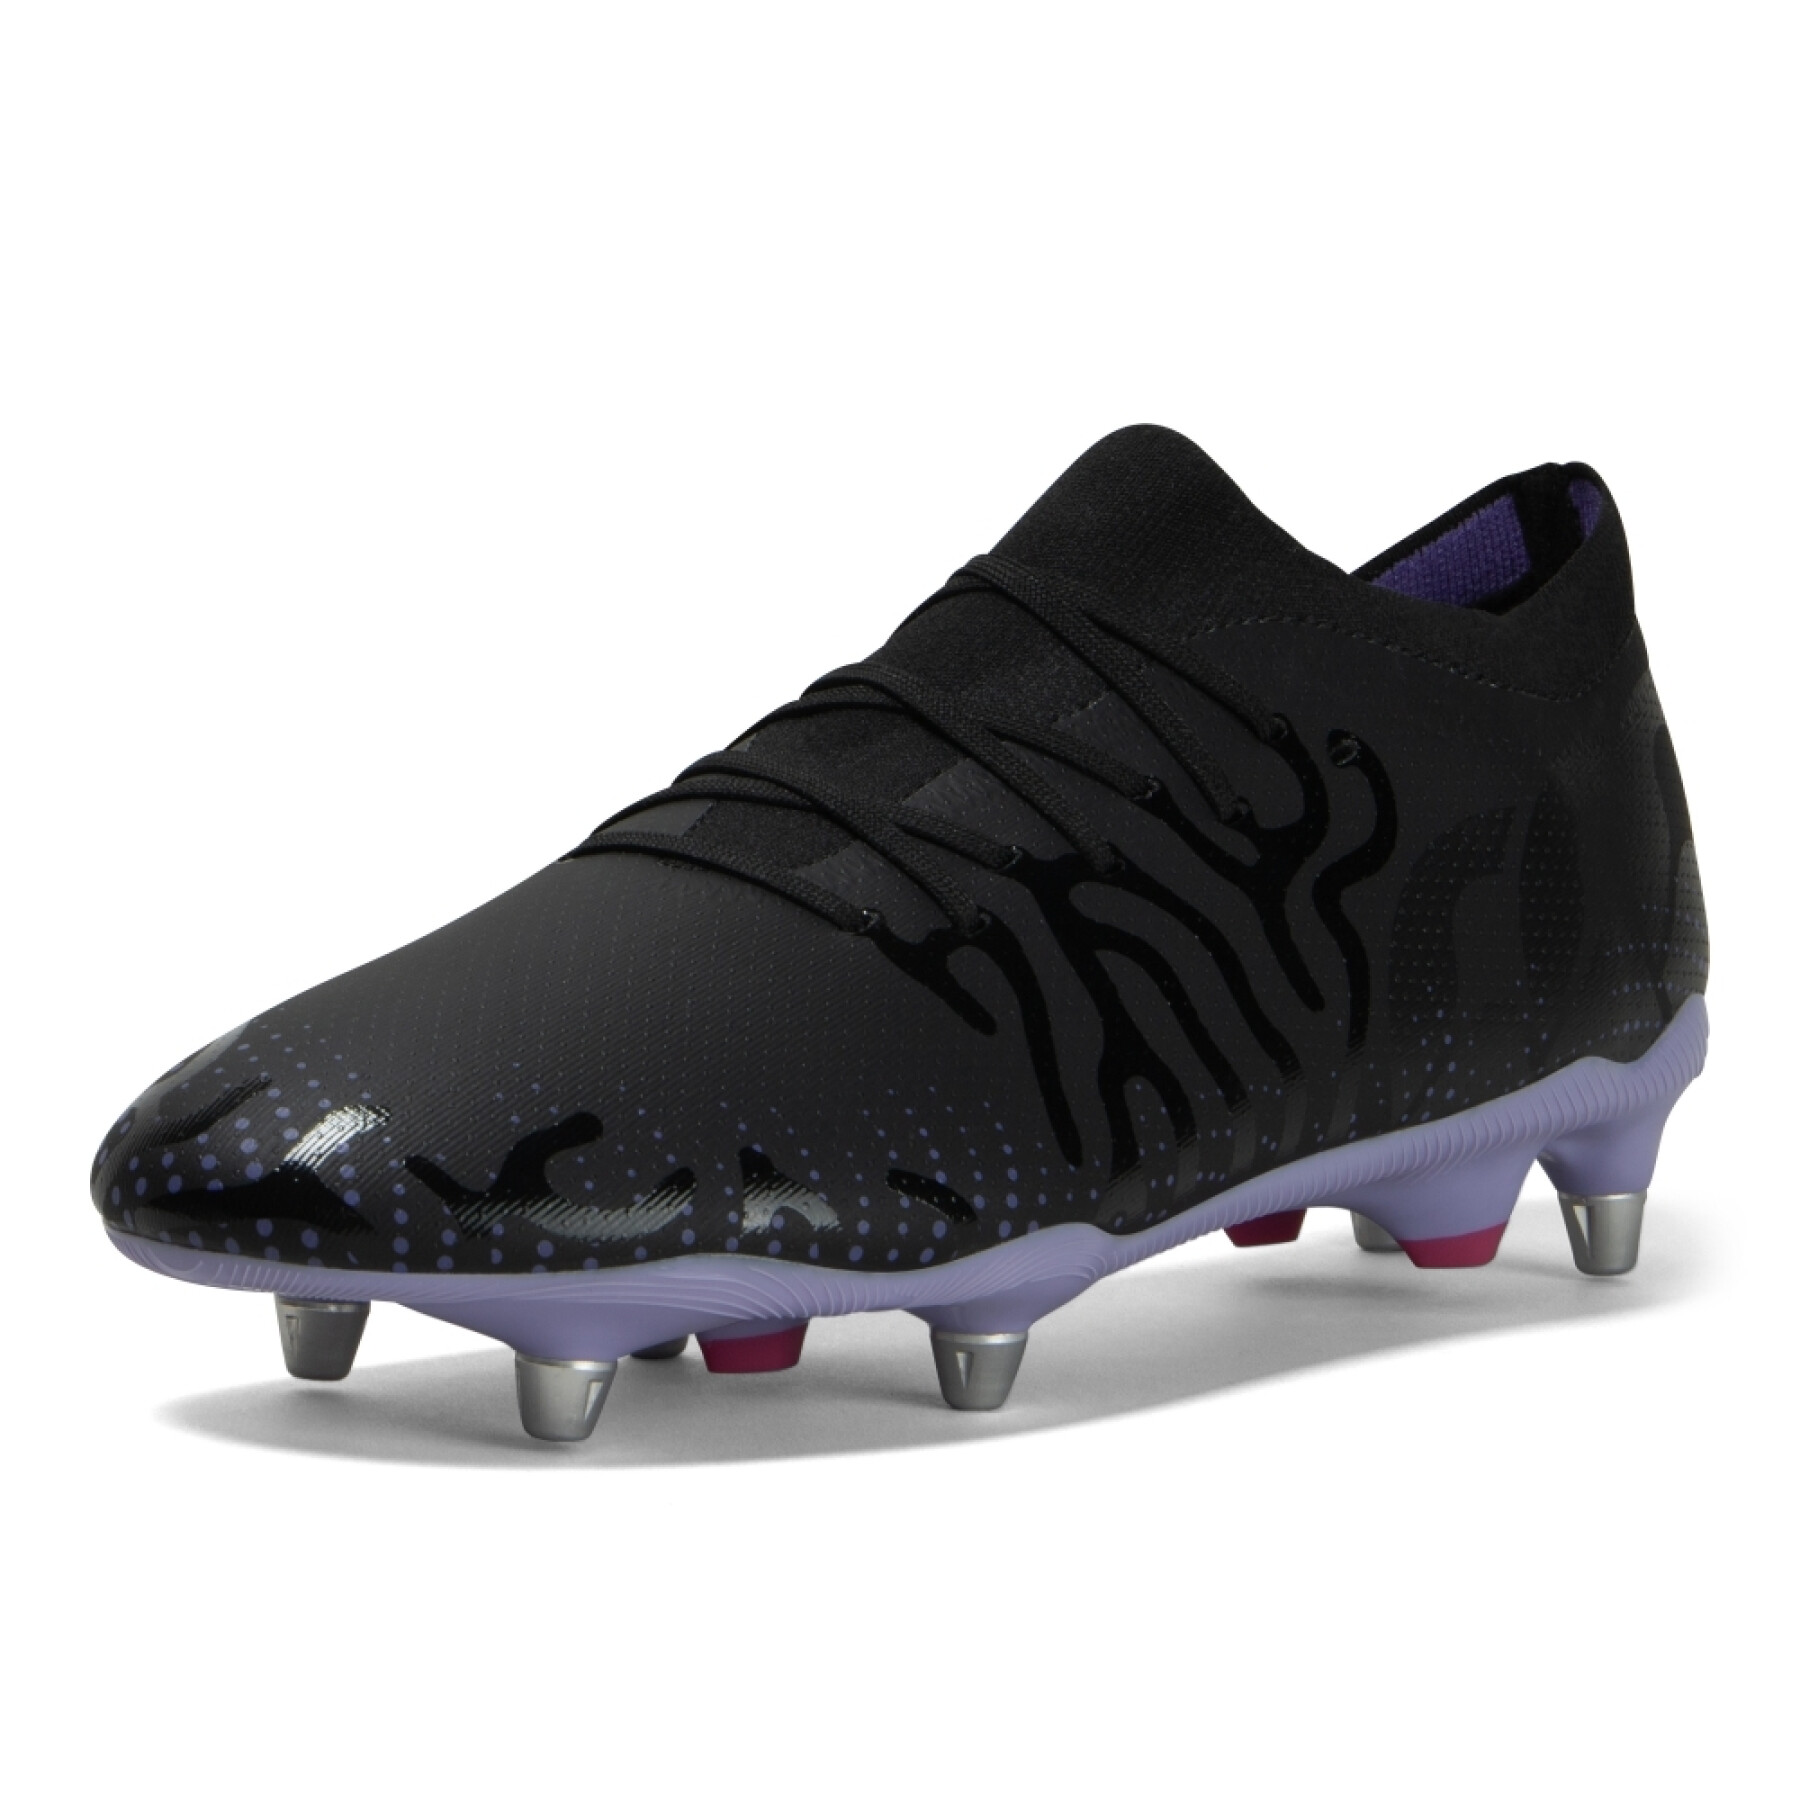 Kids rugby shoes Canterbury Speed Infinite Pro